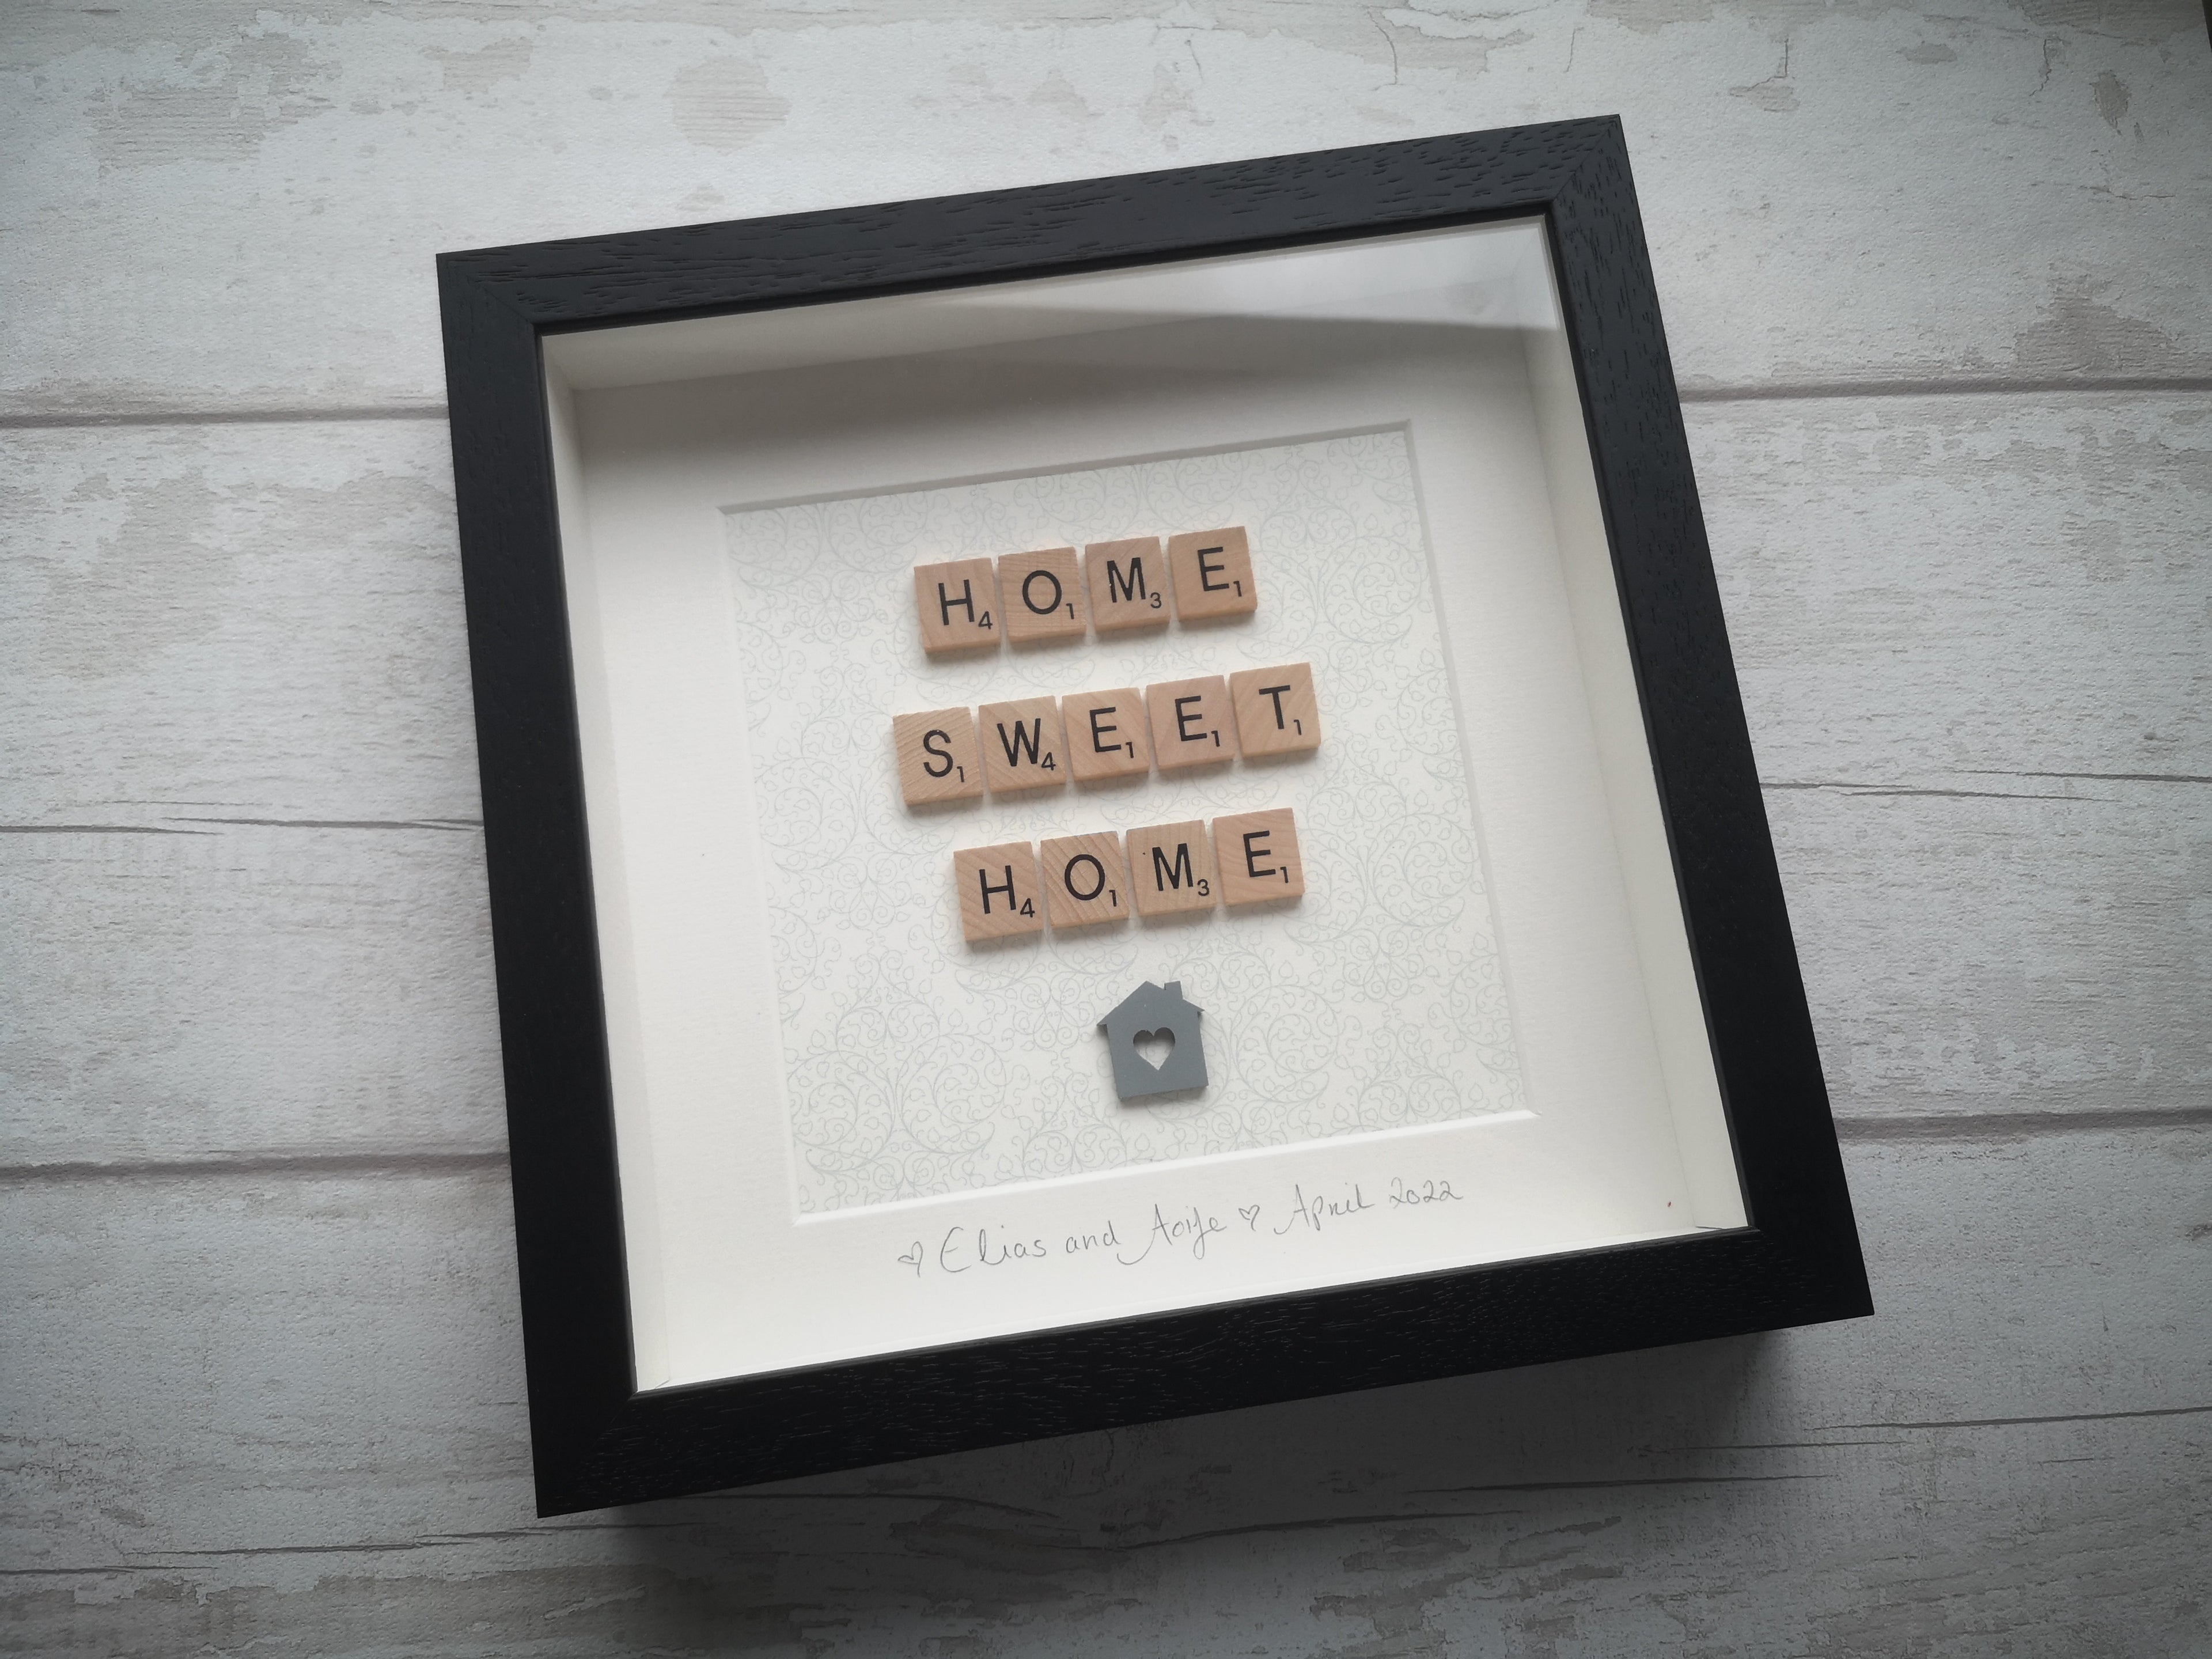 HOME SWEET HOME Scrabble tile Black Frame with little wooden house below the tiles